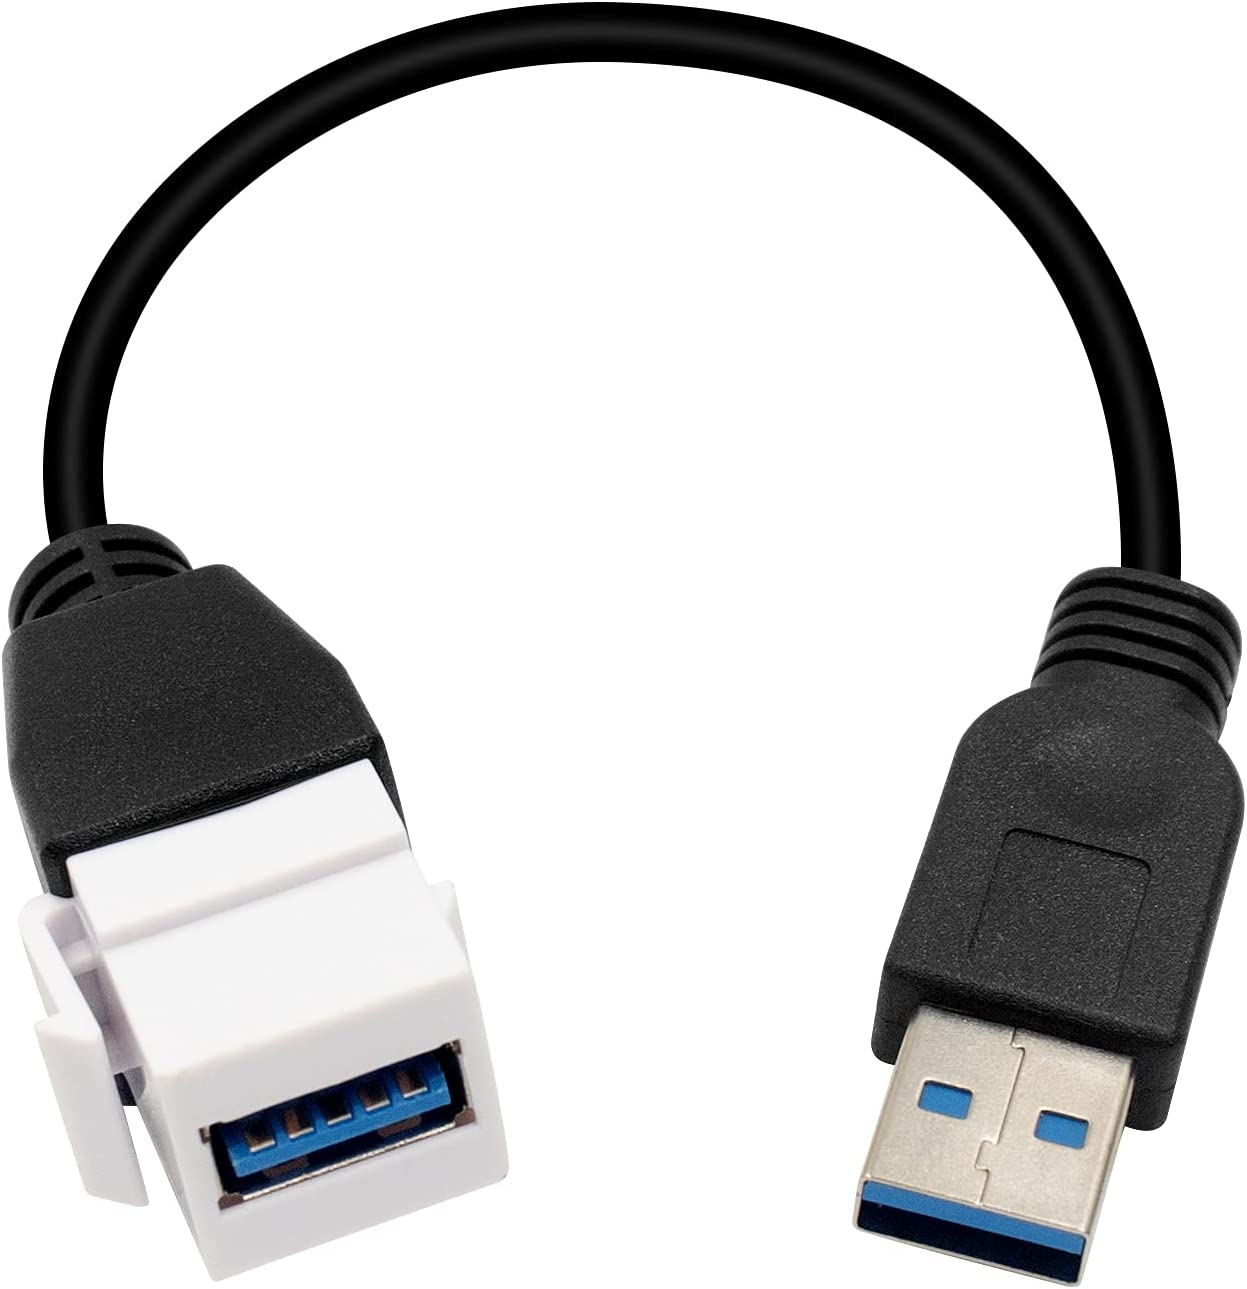 USB3.0 Keystone Jack Insert Cable for Wall Plate Outlet Panel - Click Image to Close